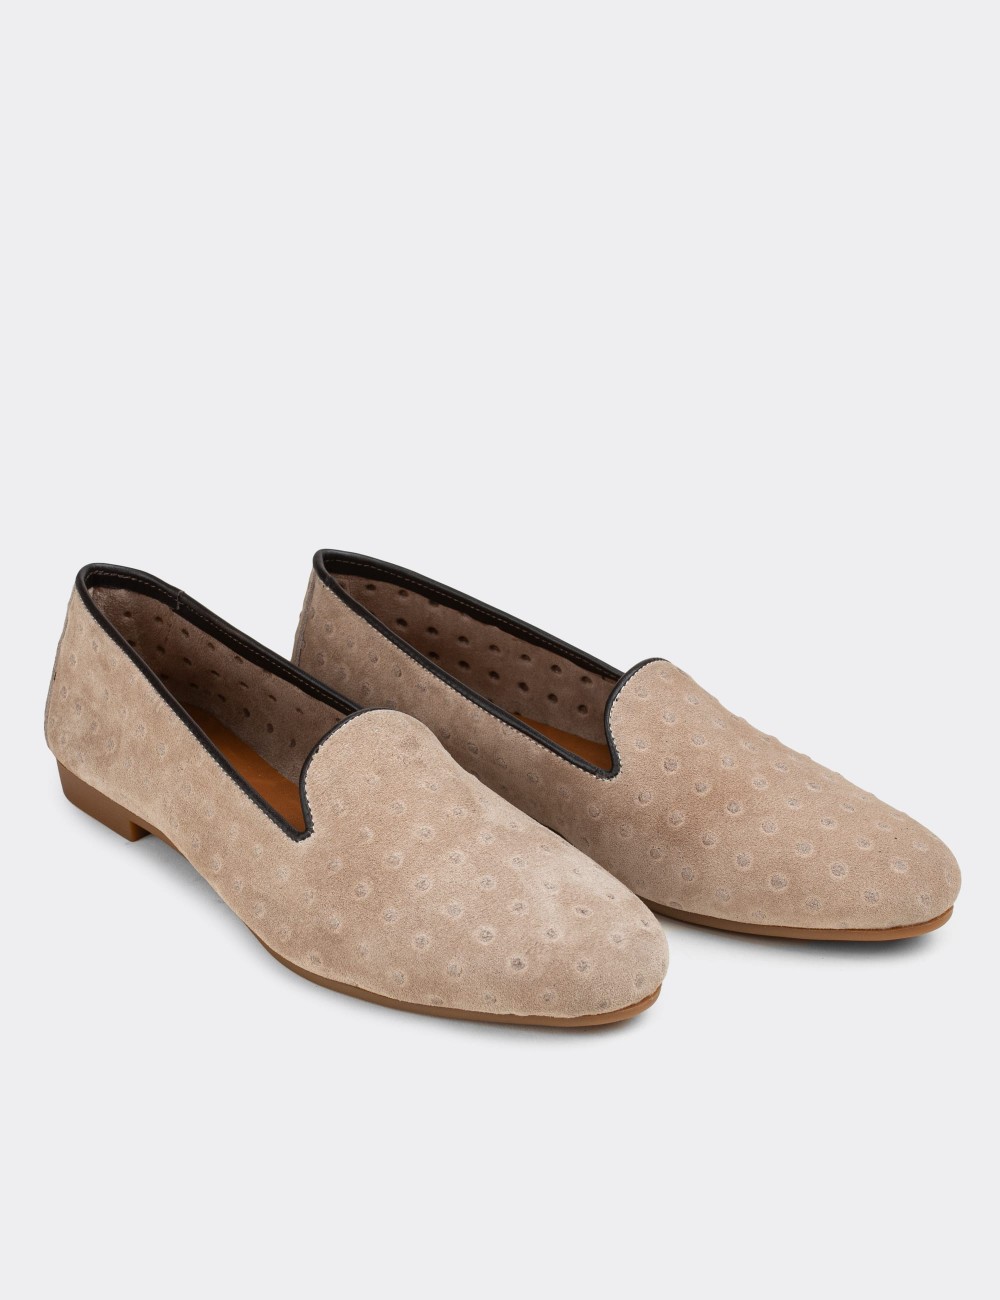 Sandstone Suede Leather Loafers  - E3208ZVZNC03